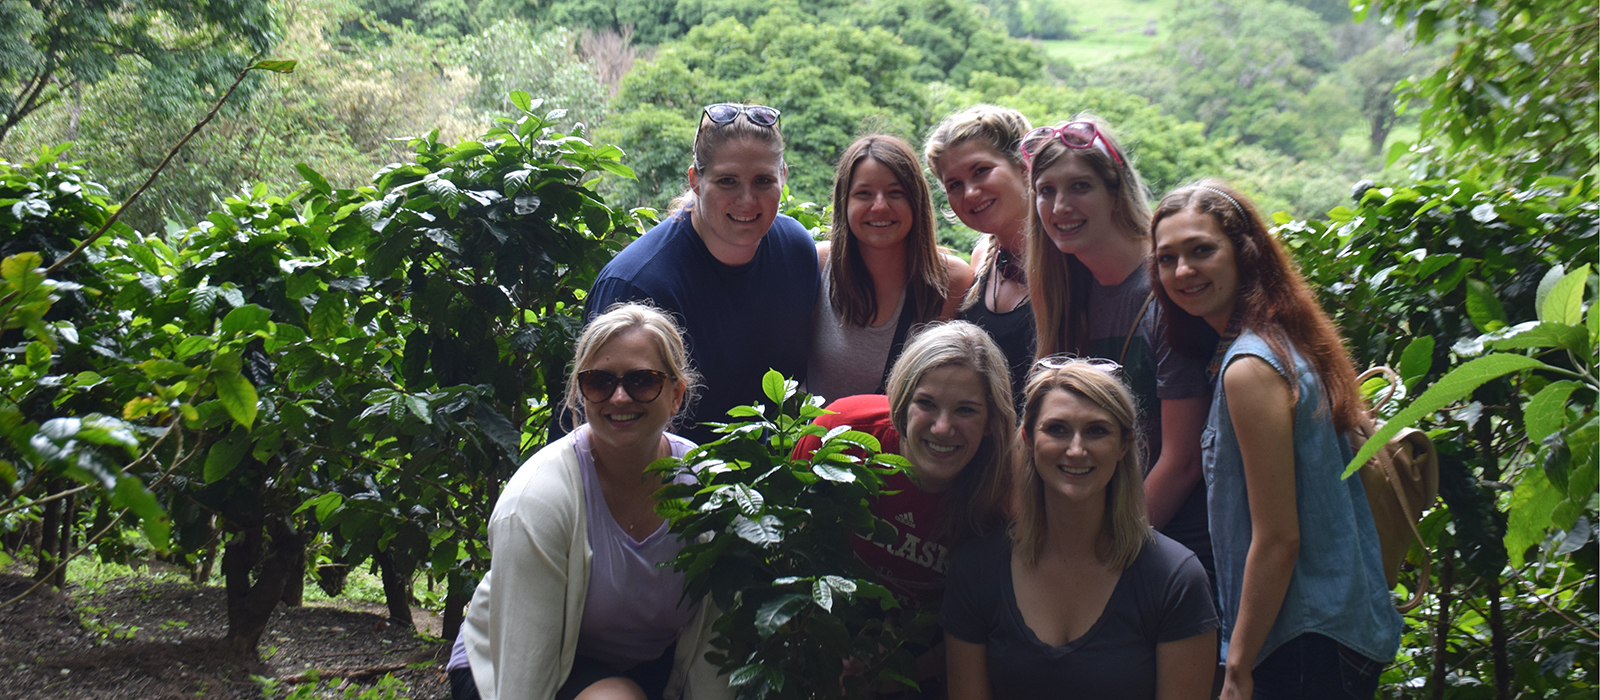 Husker students pose for a group photo at a coffee farm in Costa Rica